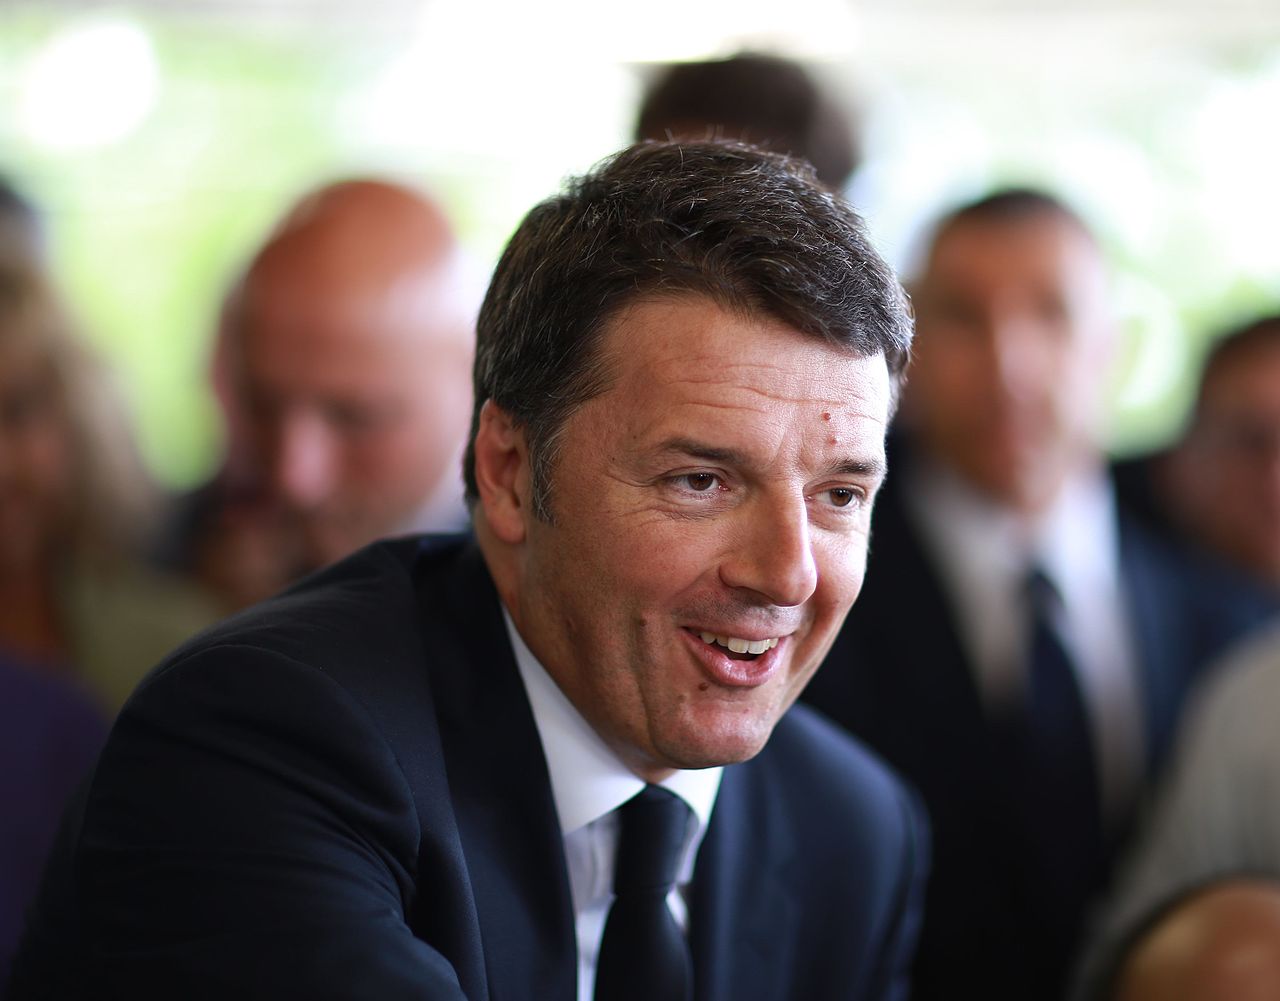 Renzi accused of illegal financing Image: https://www.flickr.com/photos/tukulti/27370052441/